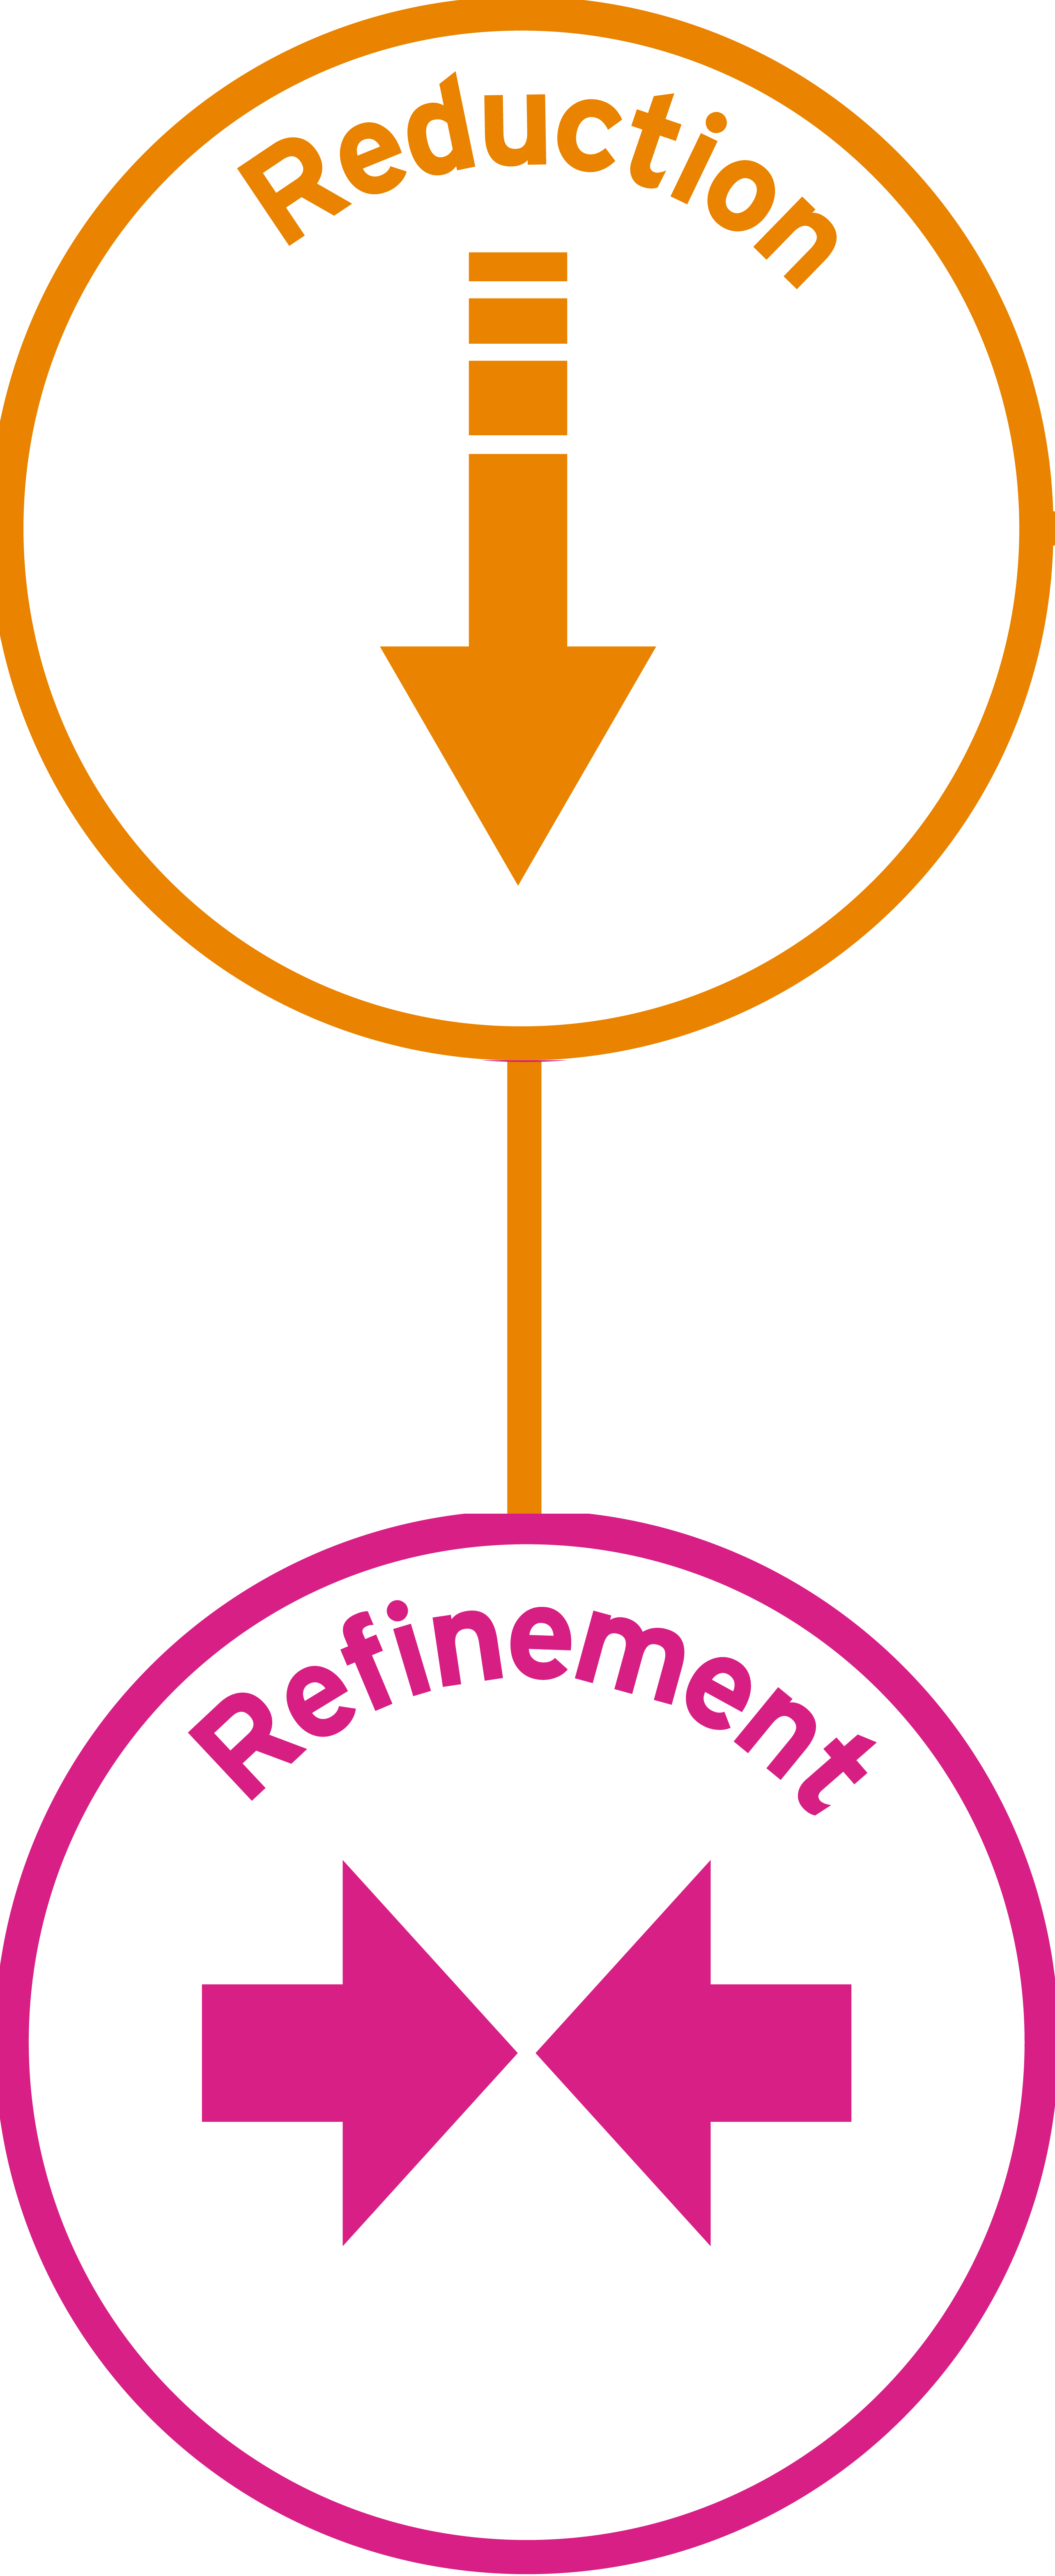 Reduction and refinement icon